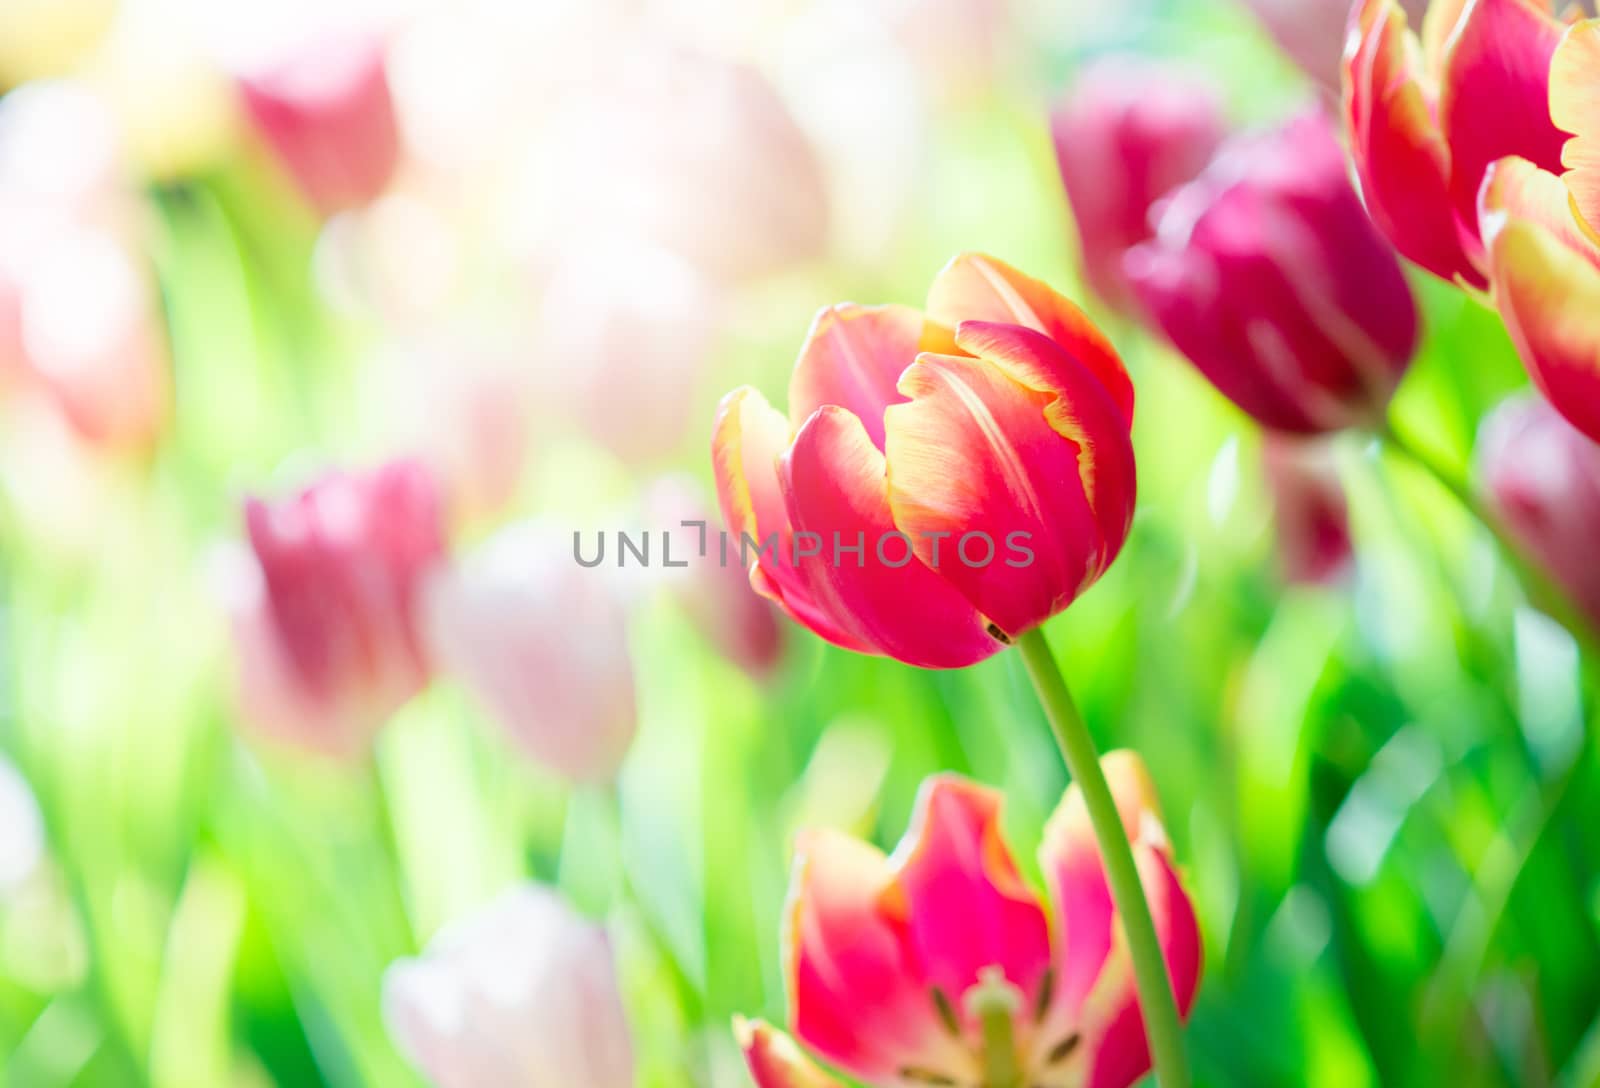 Tulip in spring with soft focus by yuiyuize